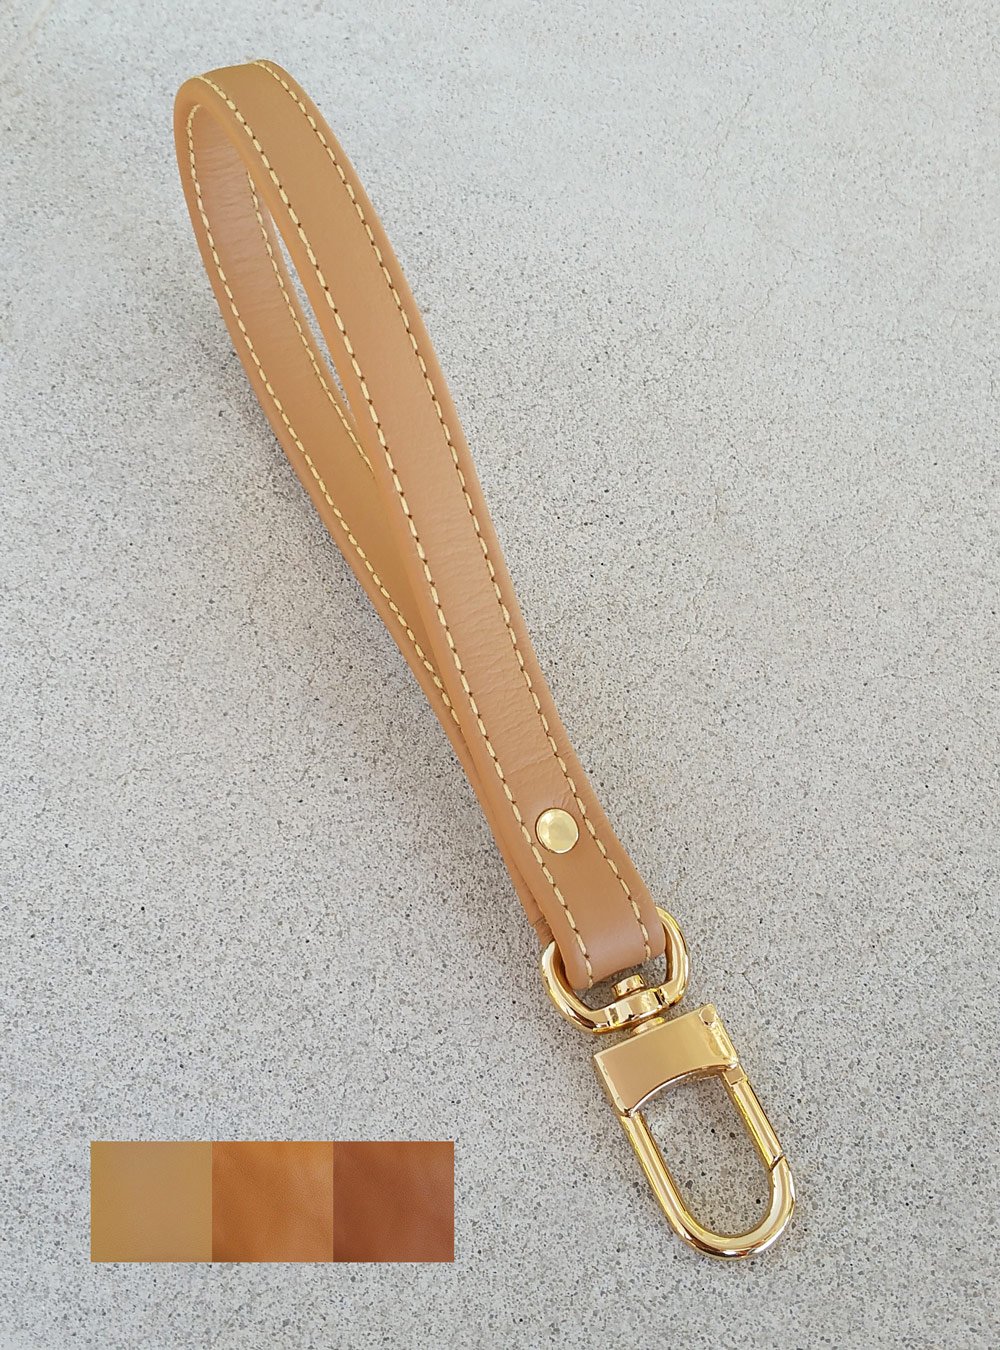 Image of Tan Leather Wrist Strap with Yellow Stitching - Choose Leather Color & Gold or Nickel #16LG Clasp